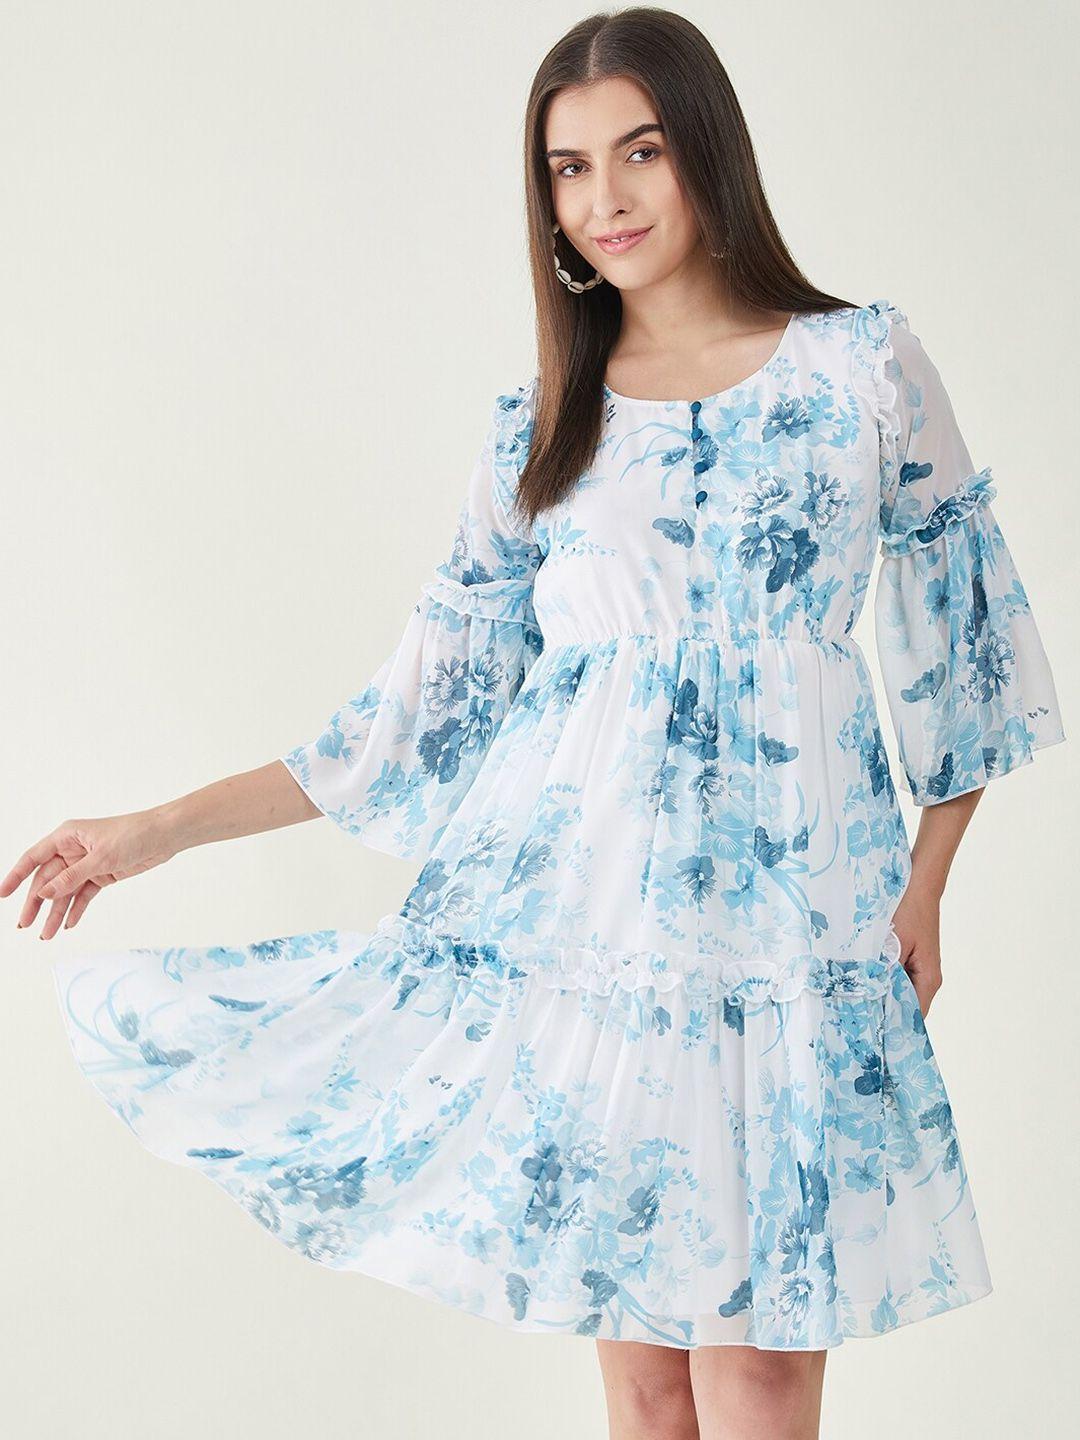 bitterlime-floral-printed-bell-sleeves-ruffled-detail-a-line-dress